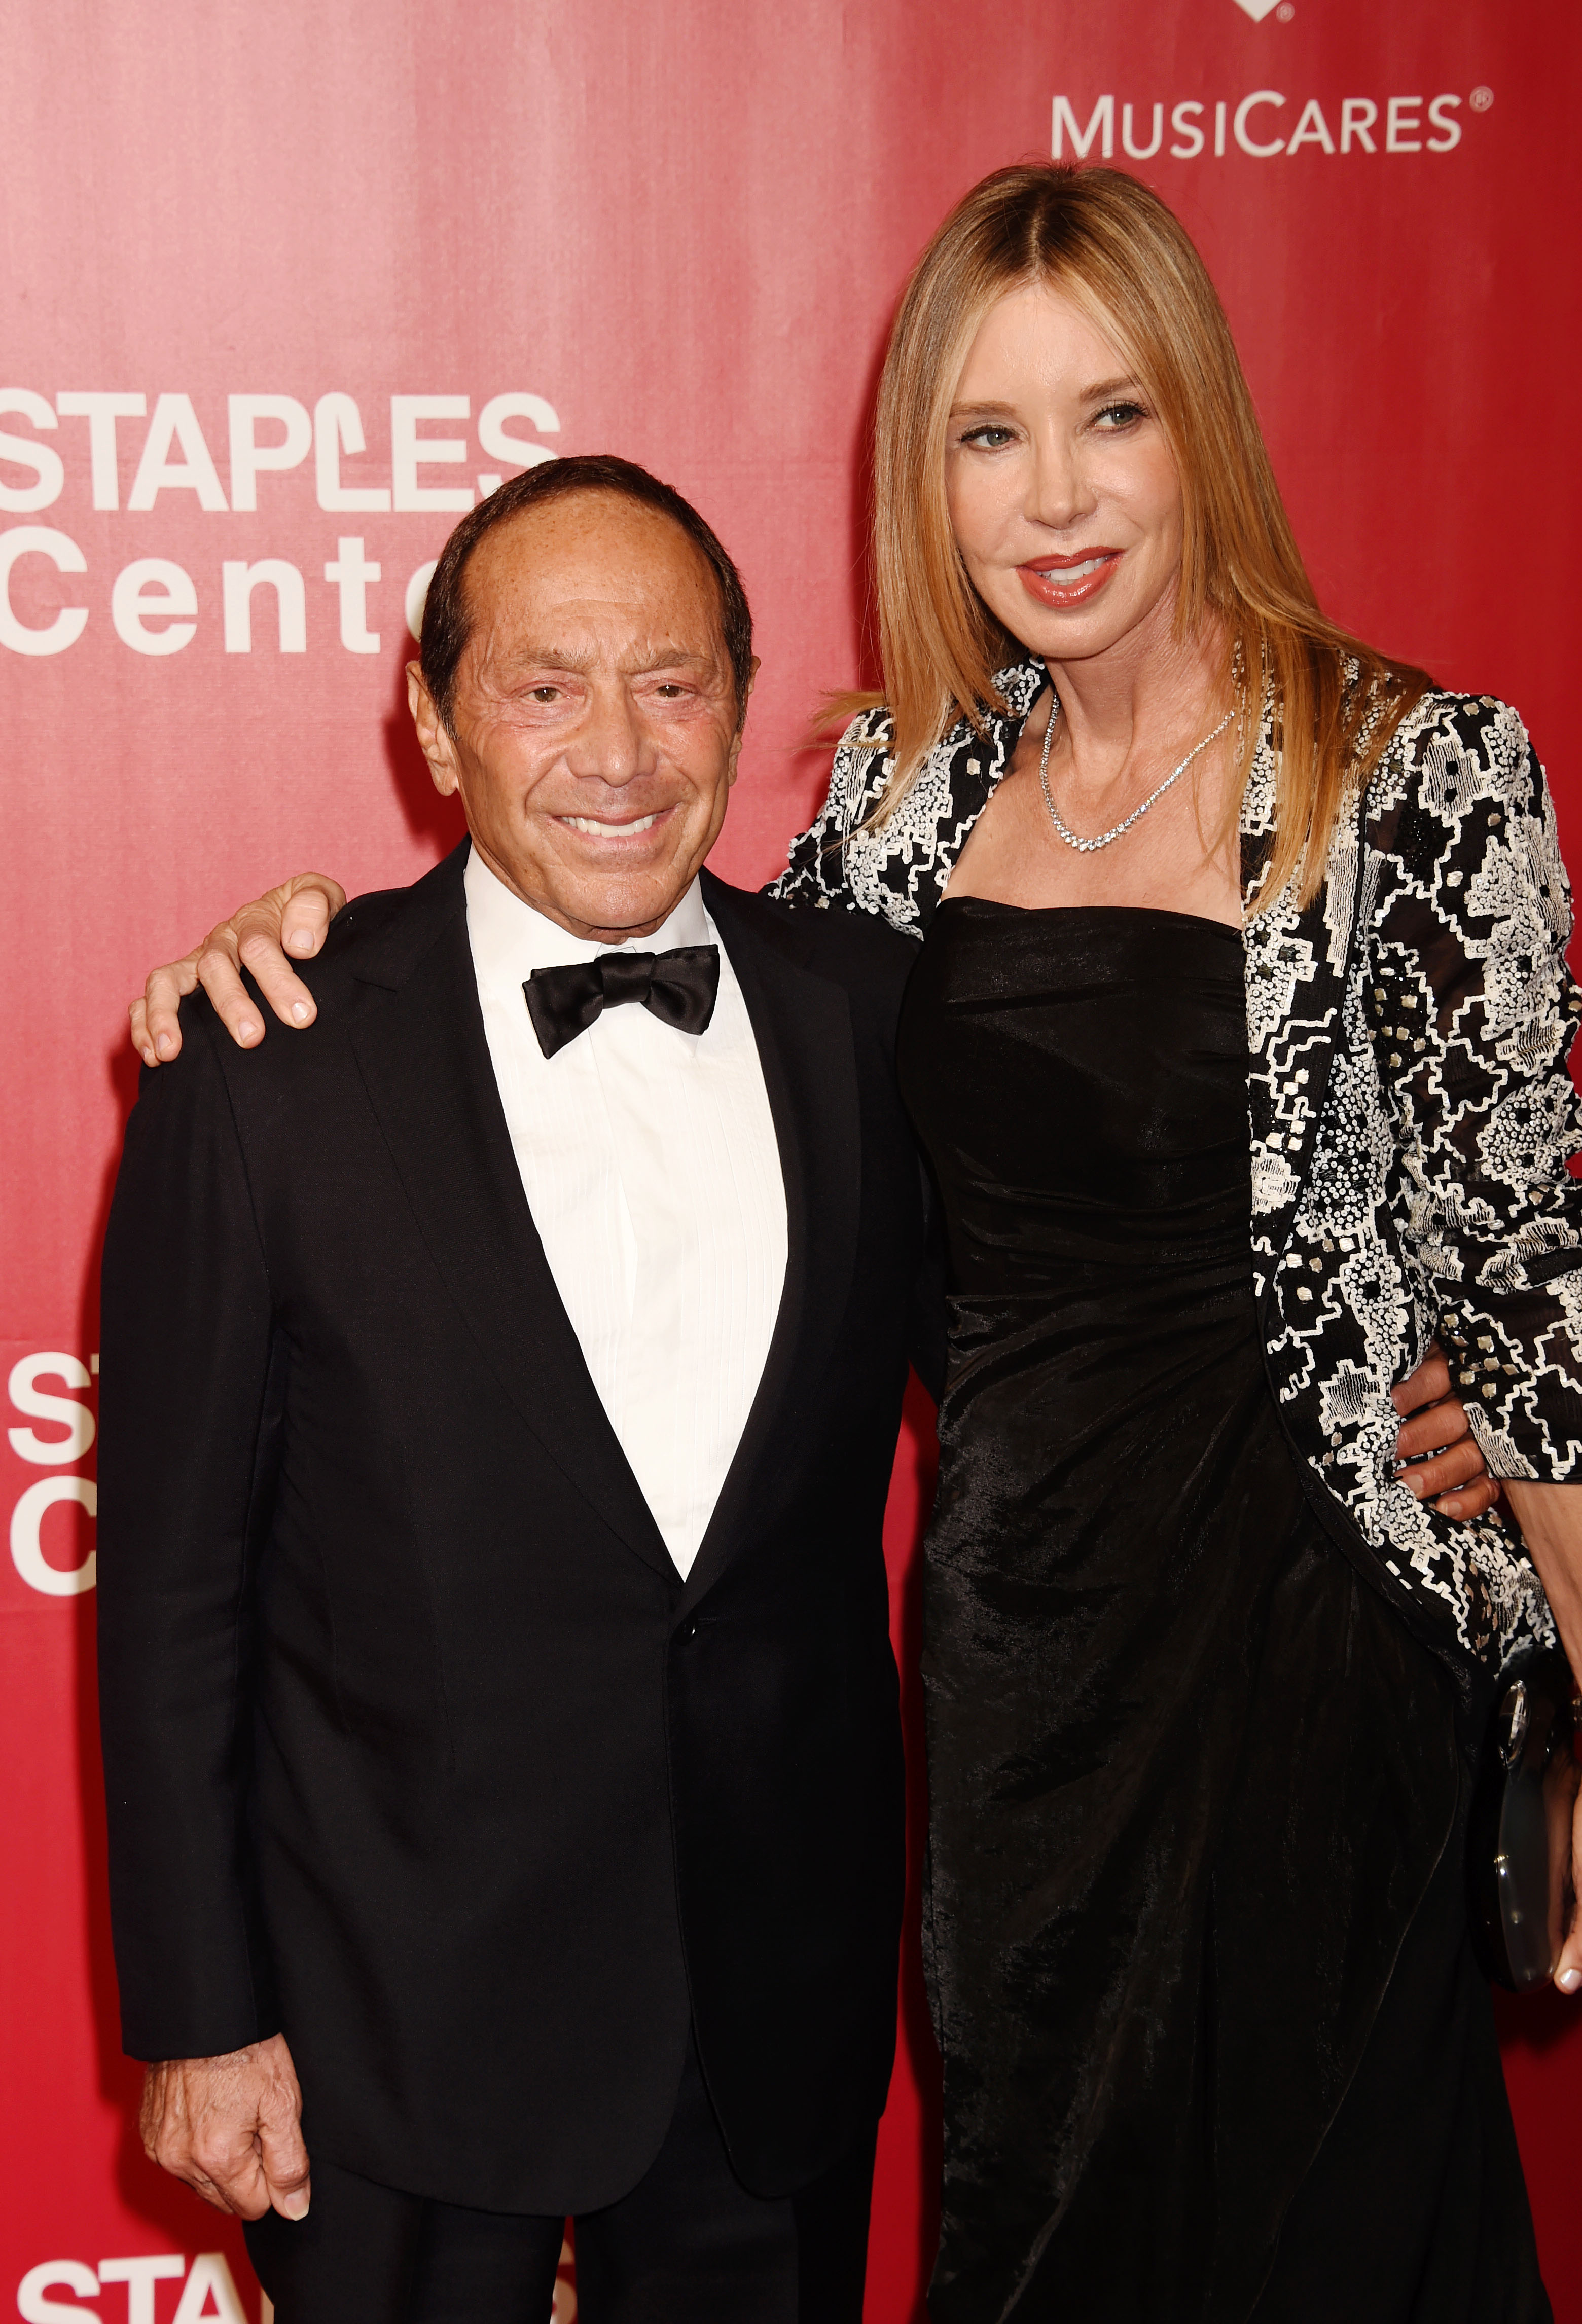 Paul Anka and Lisa Pemberton at the Los Angeles Convention Center on February 13, 2016, in Los Angeles, California. | Source: Getty Images